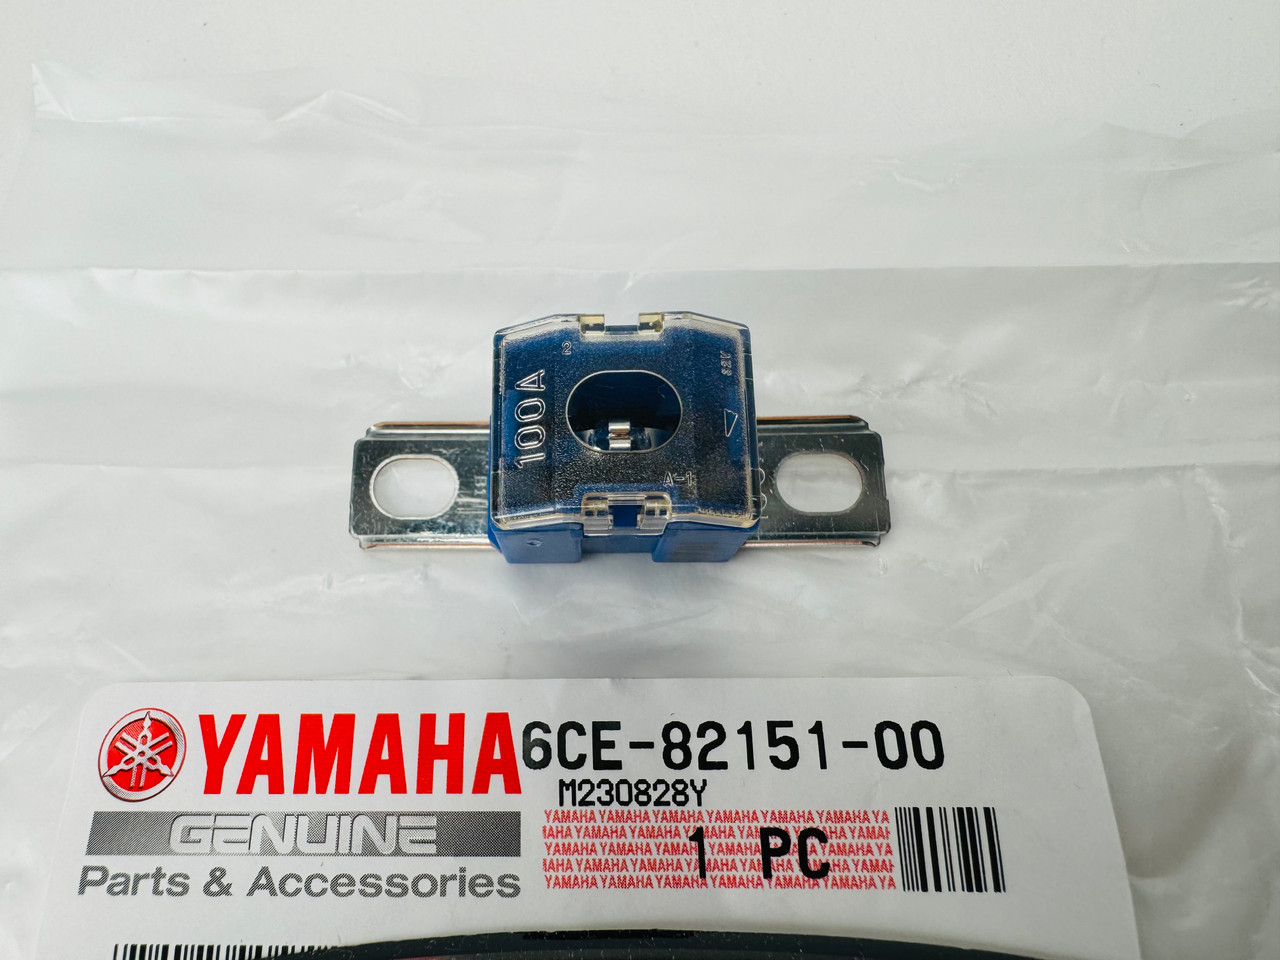 $12.99* GENUINE YAMAHA no tax*  FUSE (100A) 6CE-82151-00-00* In Stock & Ready To Ship